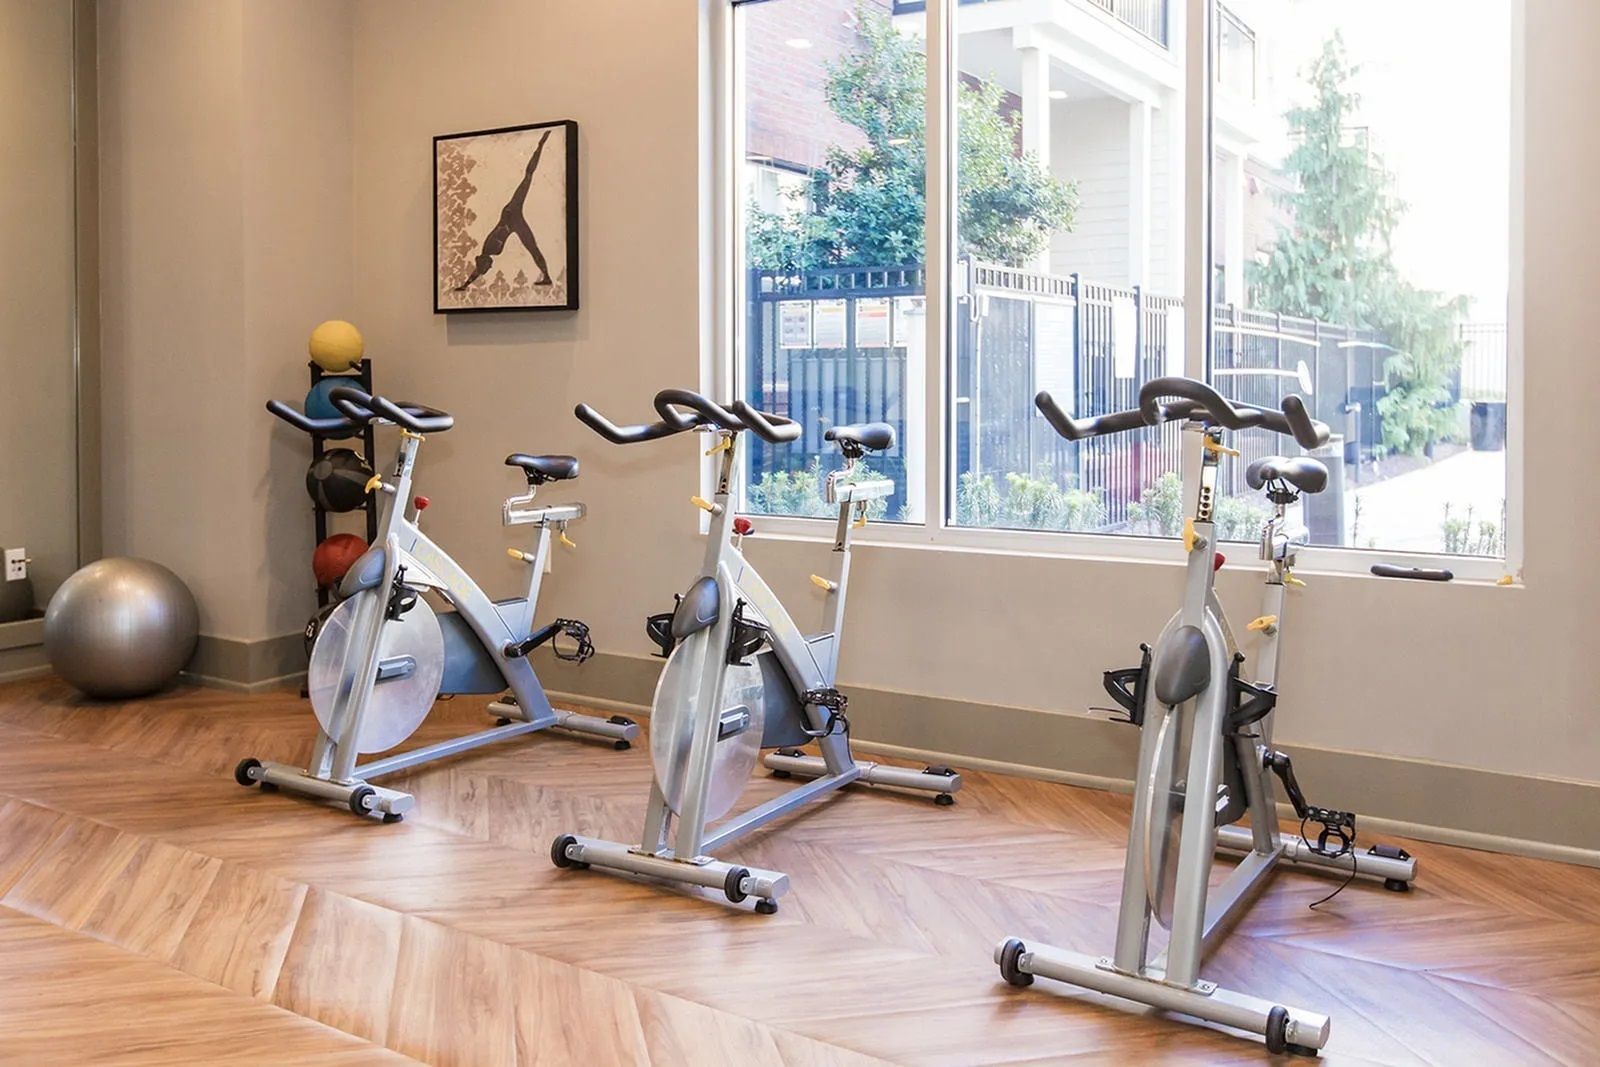 Fitness center studio cardio bikes at The Southerly.